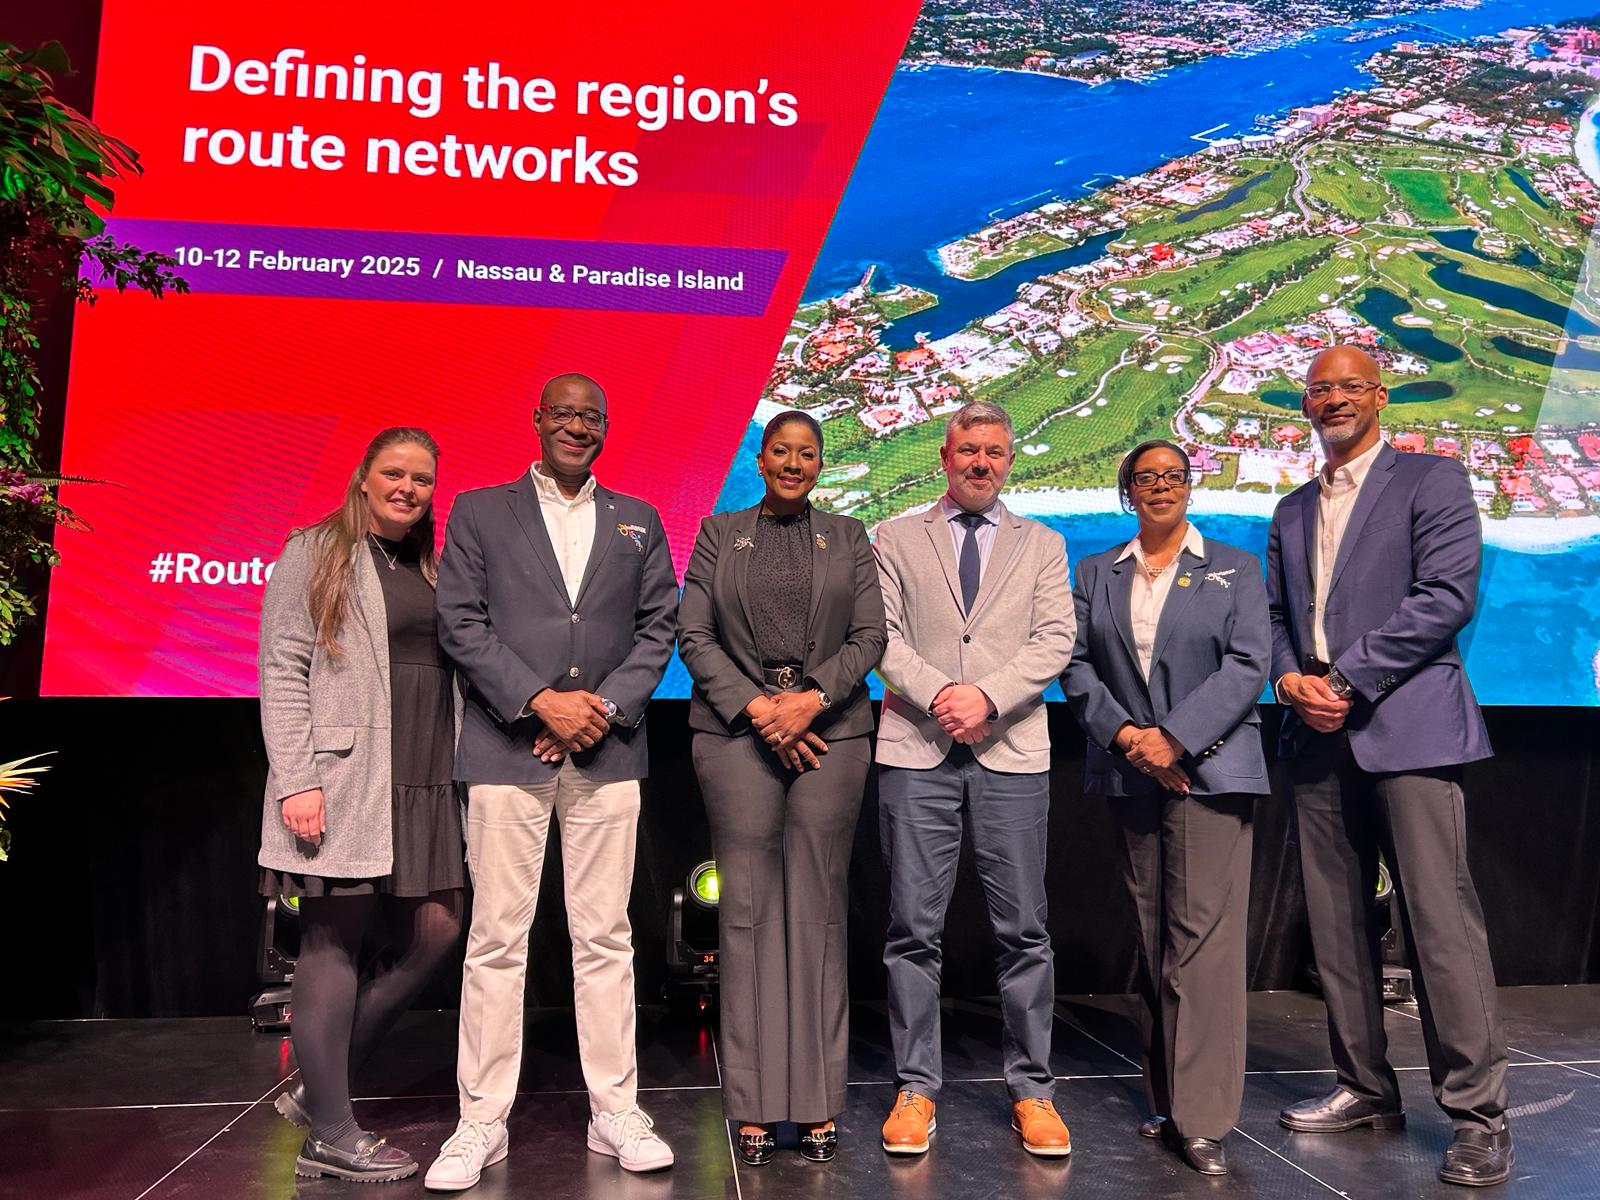 Sarah Caren, Routes Head of Host & Event Management, Dr. Kenneth Romer Deputy Director General, Director of Aviation, Latia Duncombe, Director General, Bahamas Ministry of Tourism, Steven Small, Routes, Director of Events, Deputy Director General, Valery Brown-Alce, Director of Airlift Giovanni Grant